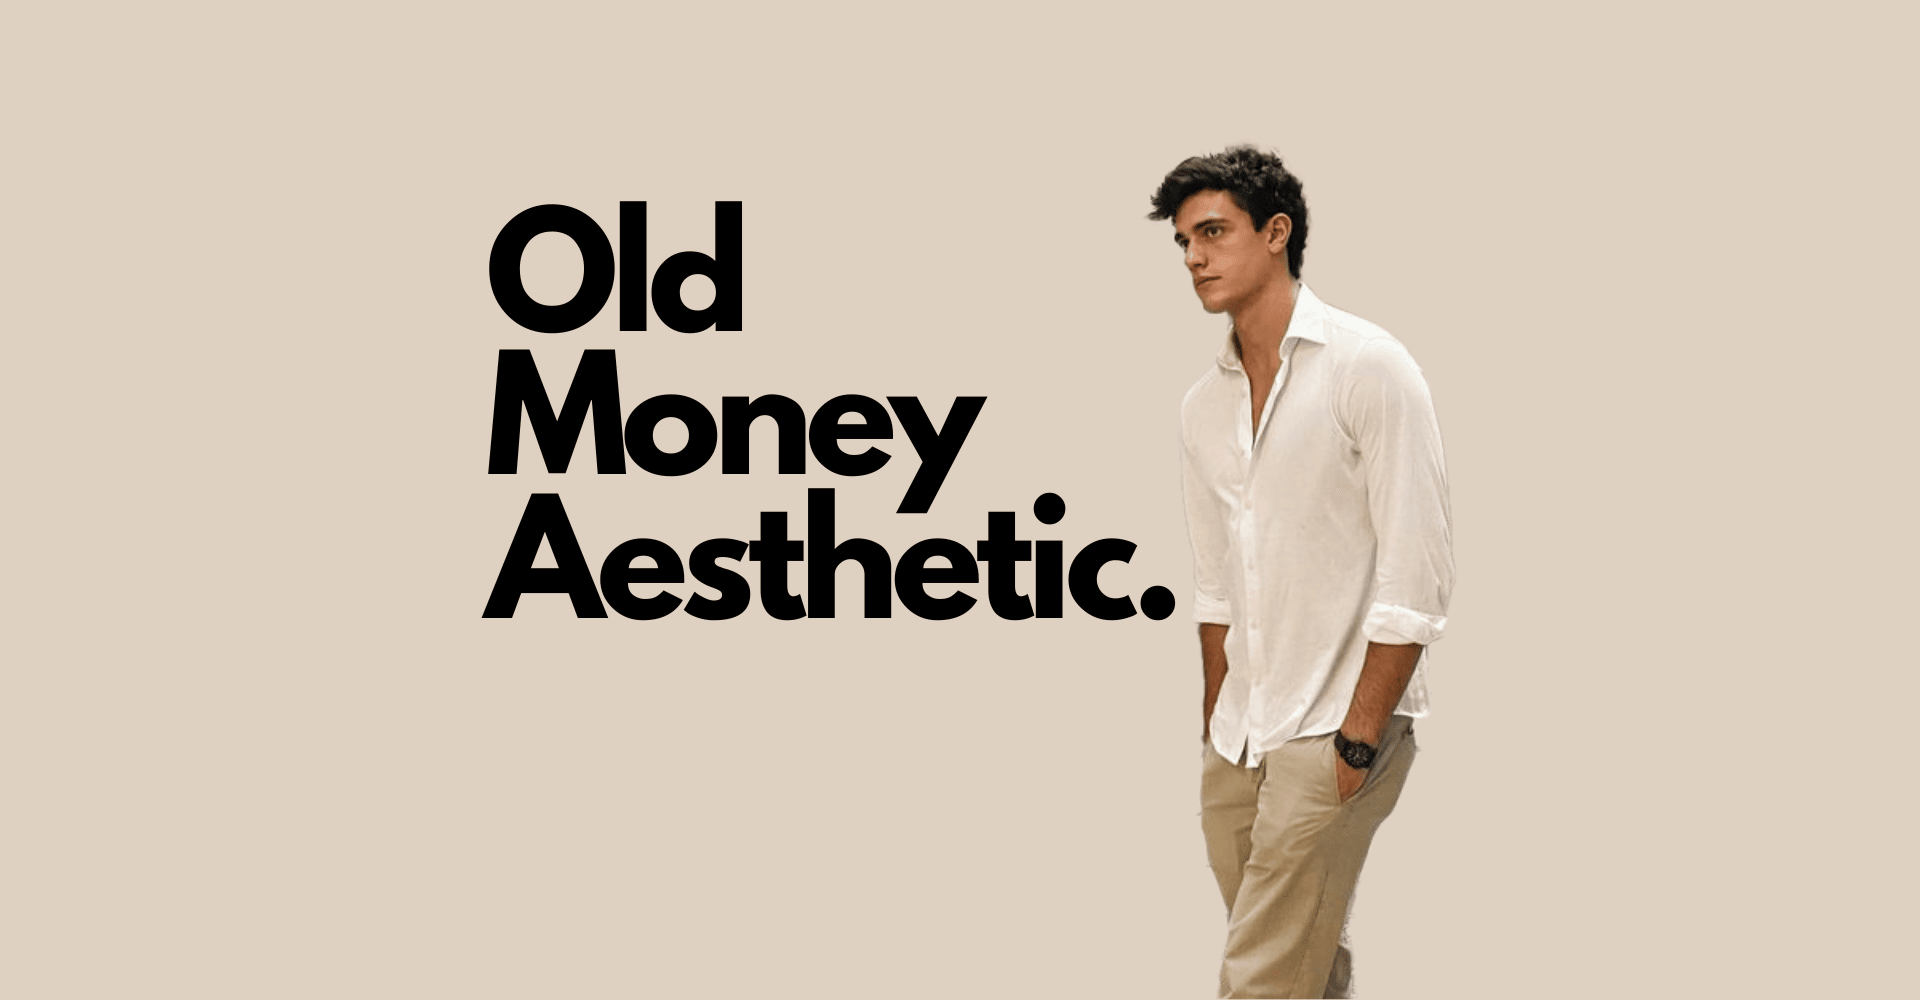 The Old Money aesthetic: What is it and how to wear it